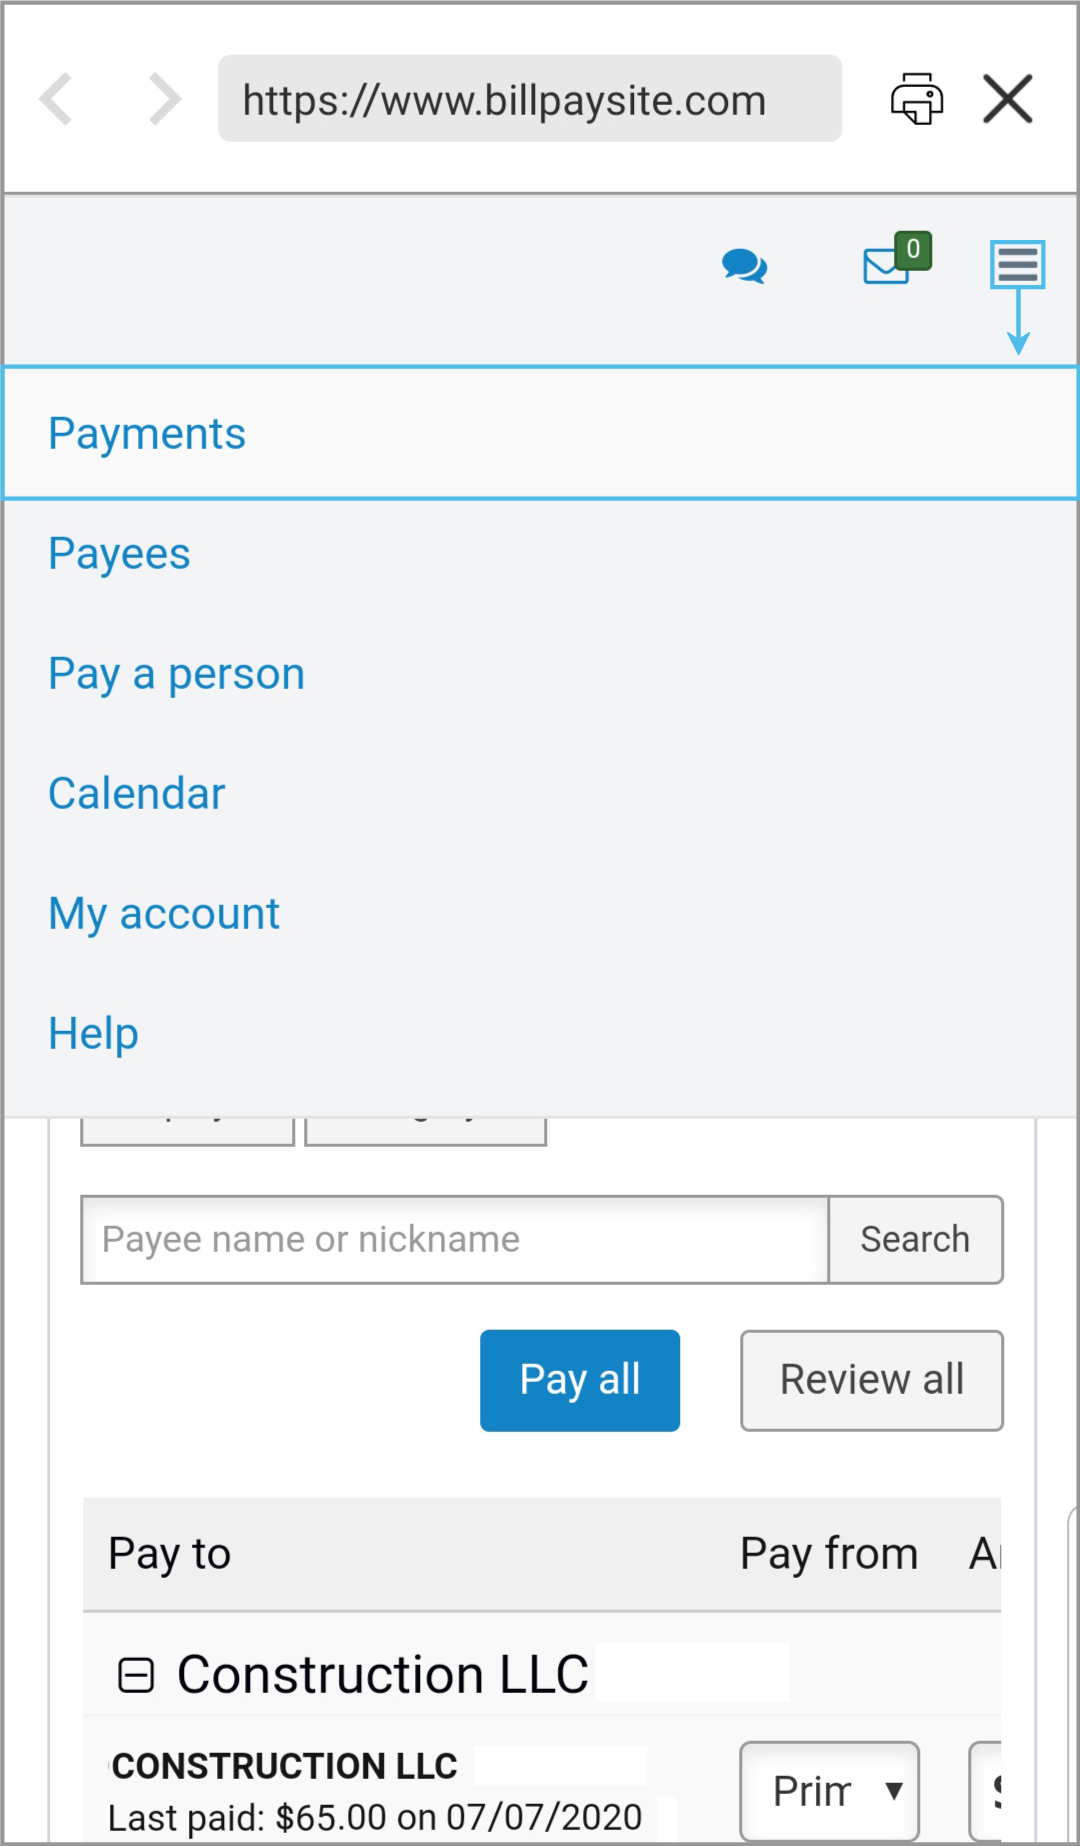 Navigate to Bill Pay and select My Account